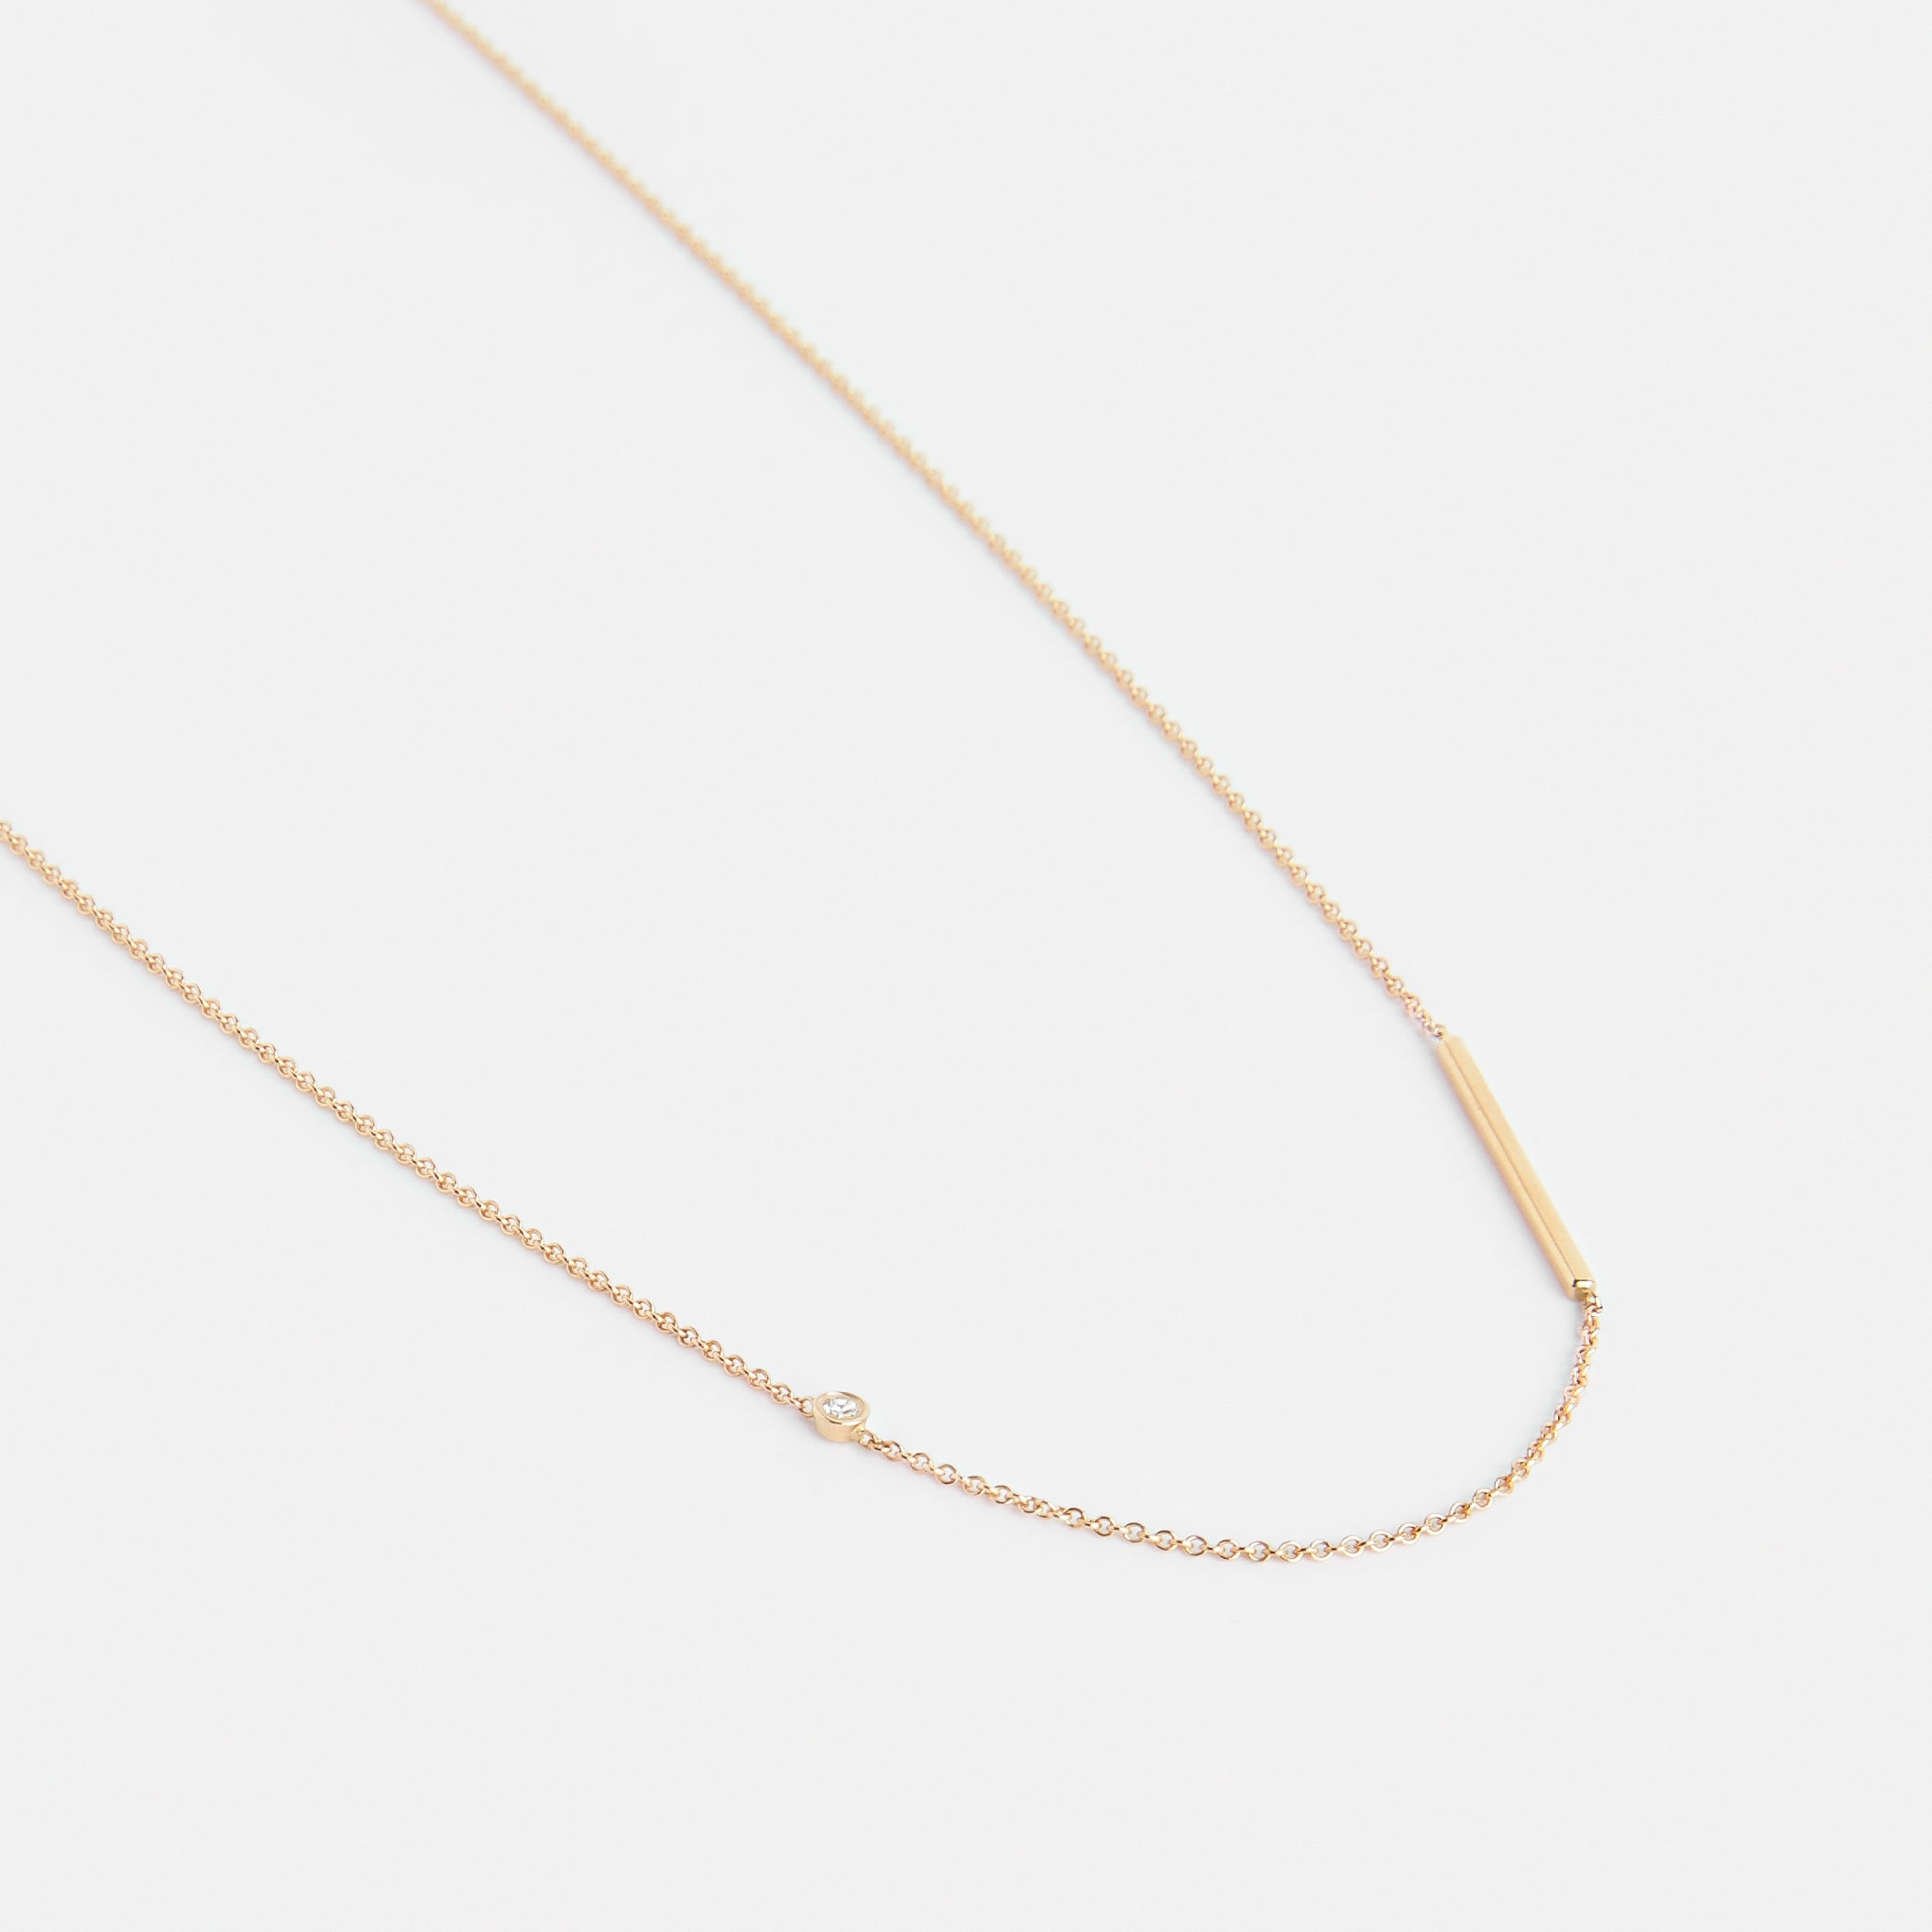 Iki Non-Traditional Necklace in 14k Gold set with White Diamond By SHW Fine Jewelry NYC